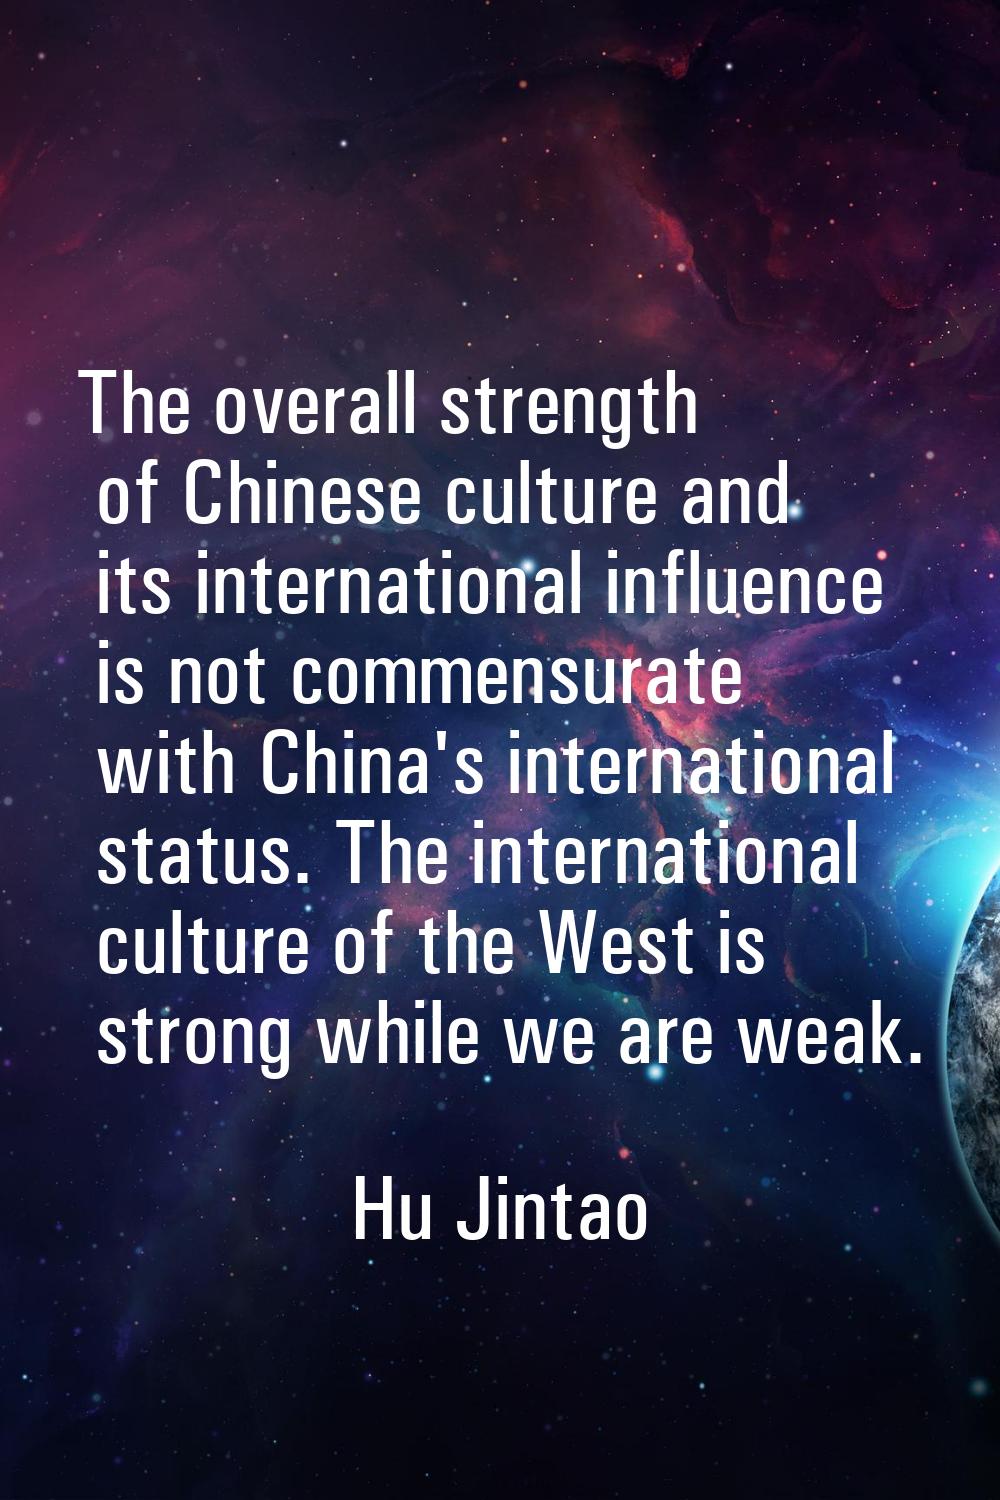 The overall strength of Chinese culture and its international influence is not commensurate with Ch